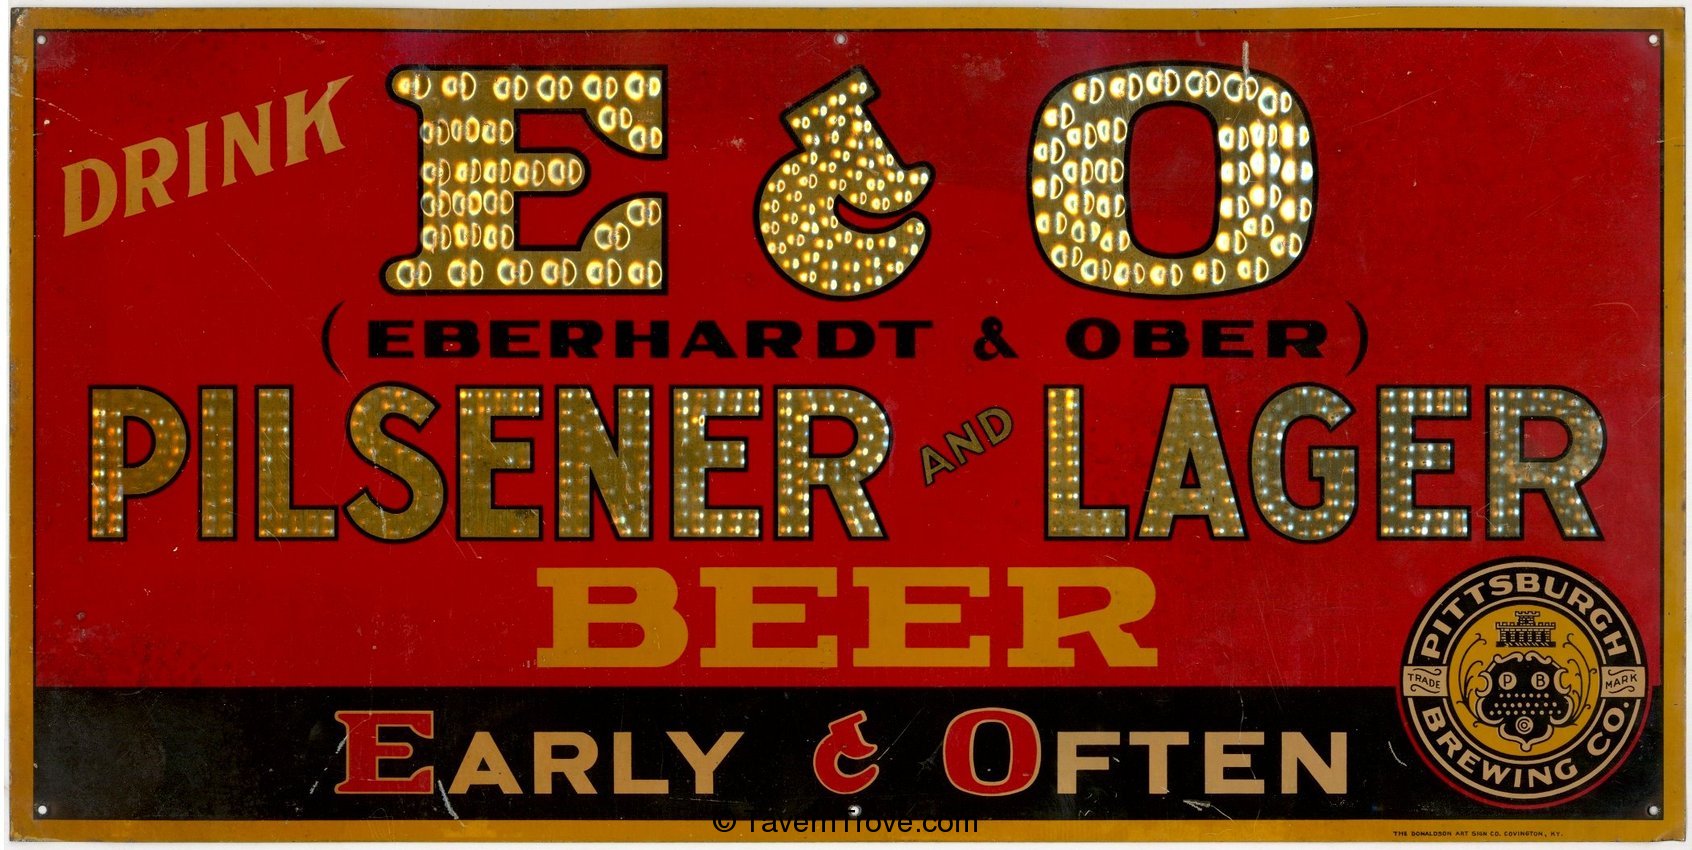 E & O Pilsener and Lager Beer